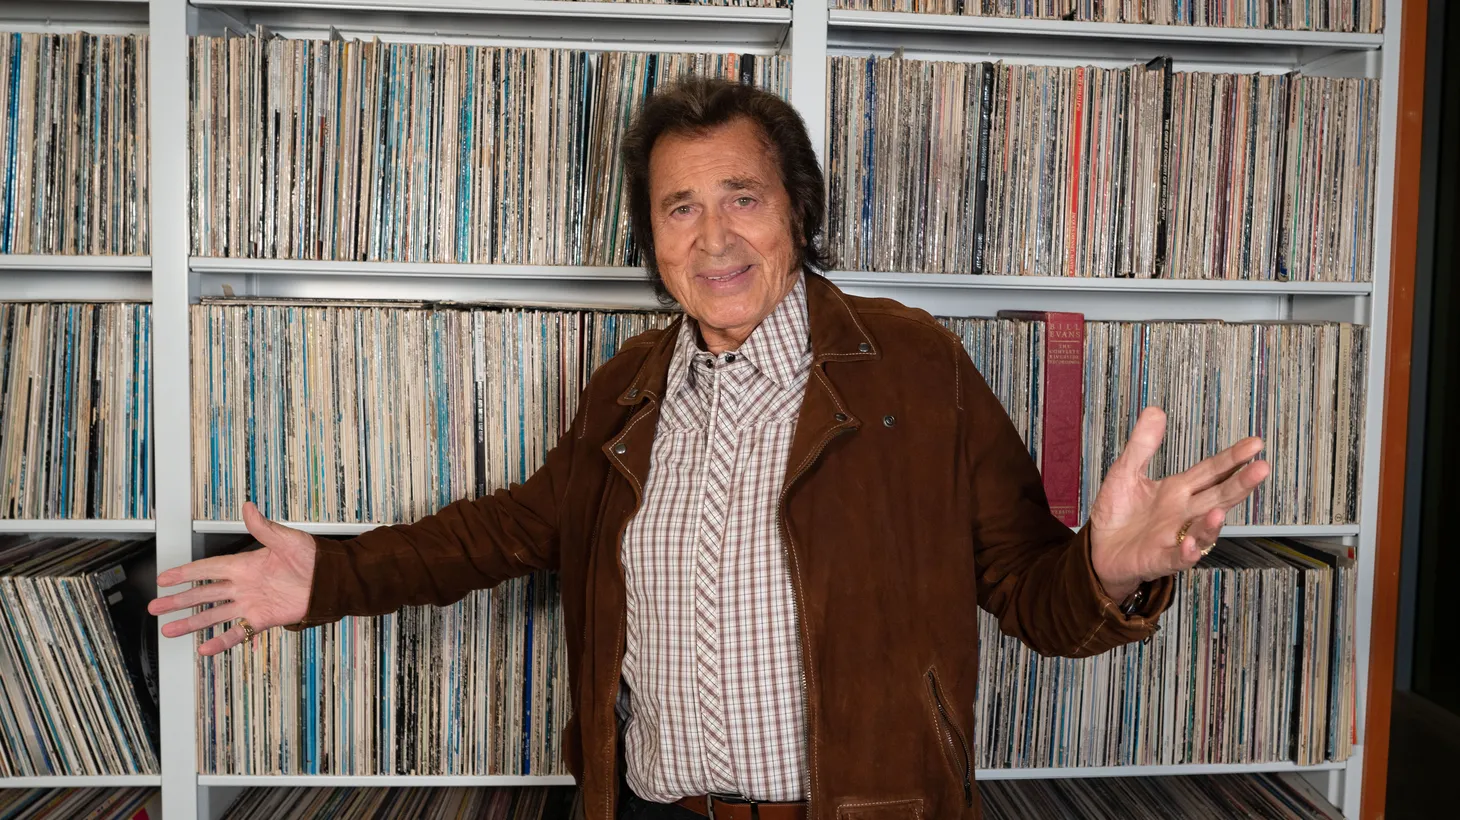 “You have to use your eyes, your nose, your mouth, your face, your actions, your body language. It's all acting, it's a performance,” shares singer Englebert Humperdinck.